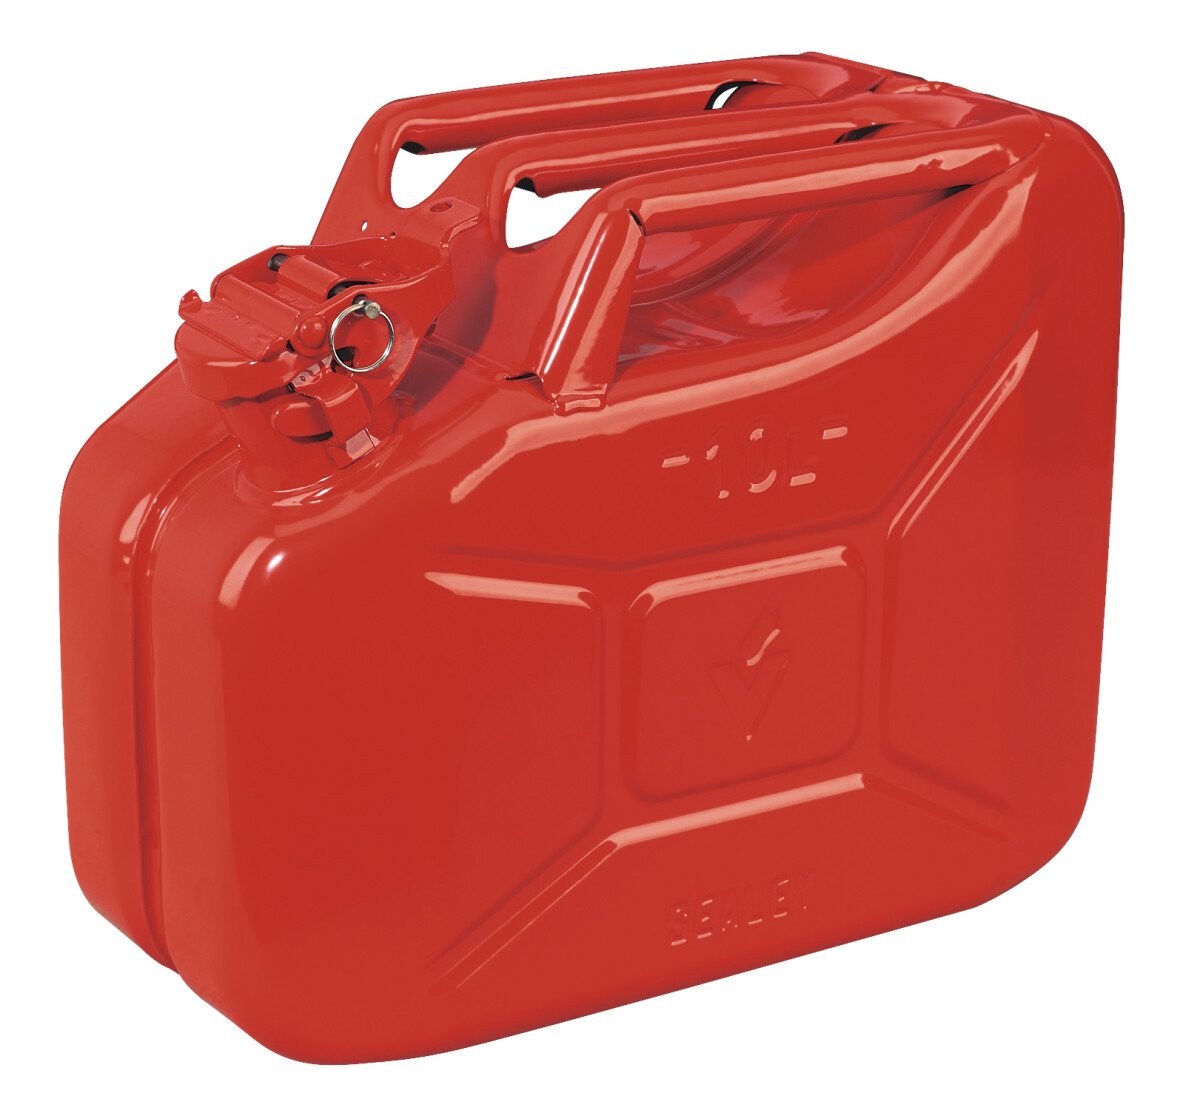 Sealey JC10 Jerry Can 10ltr - Red